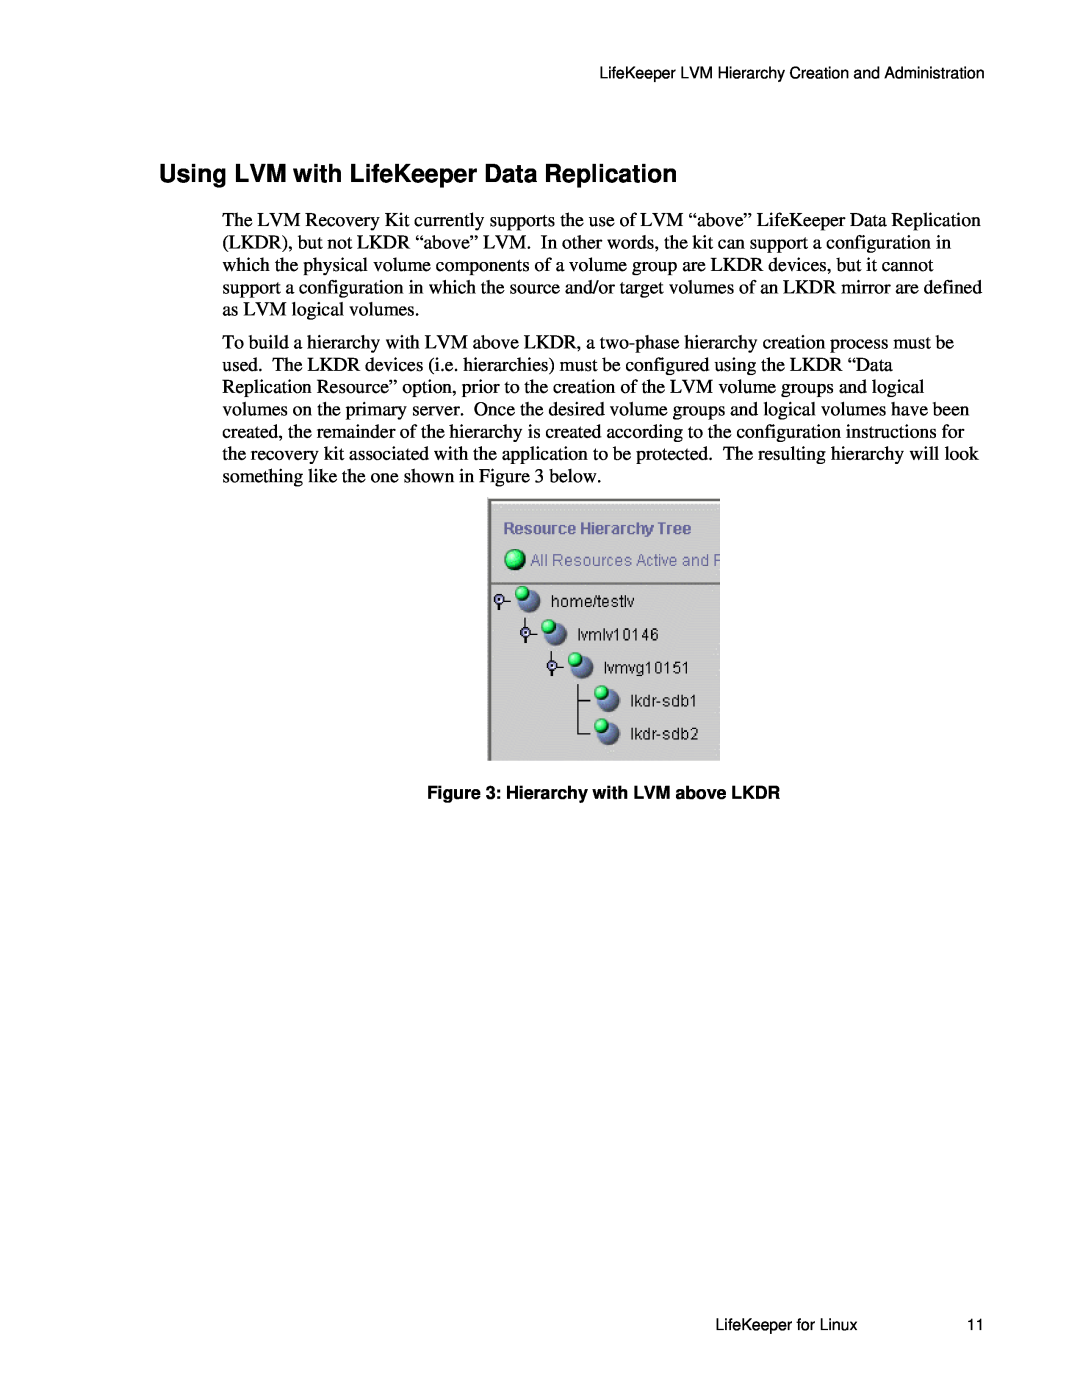 SteelEye 4.5.0 manual Using LVM with LifeKeeper Data Replication, Hierarchy with LVM above LKDR 